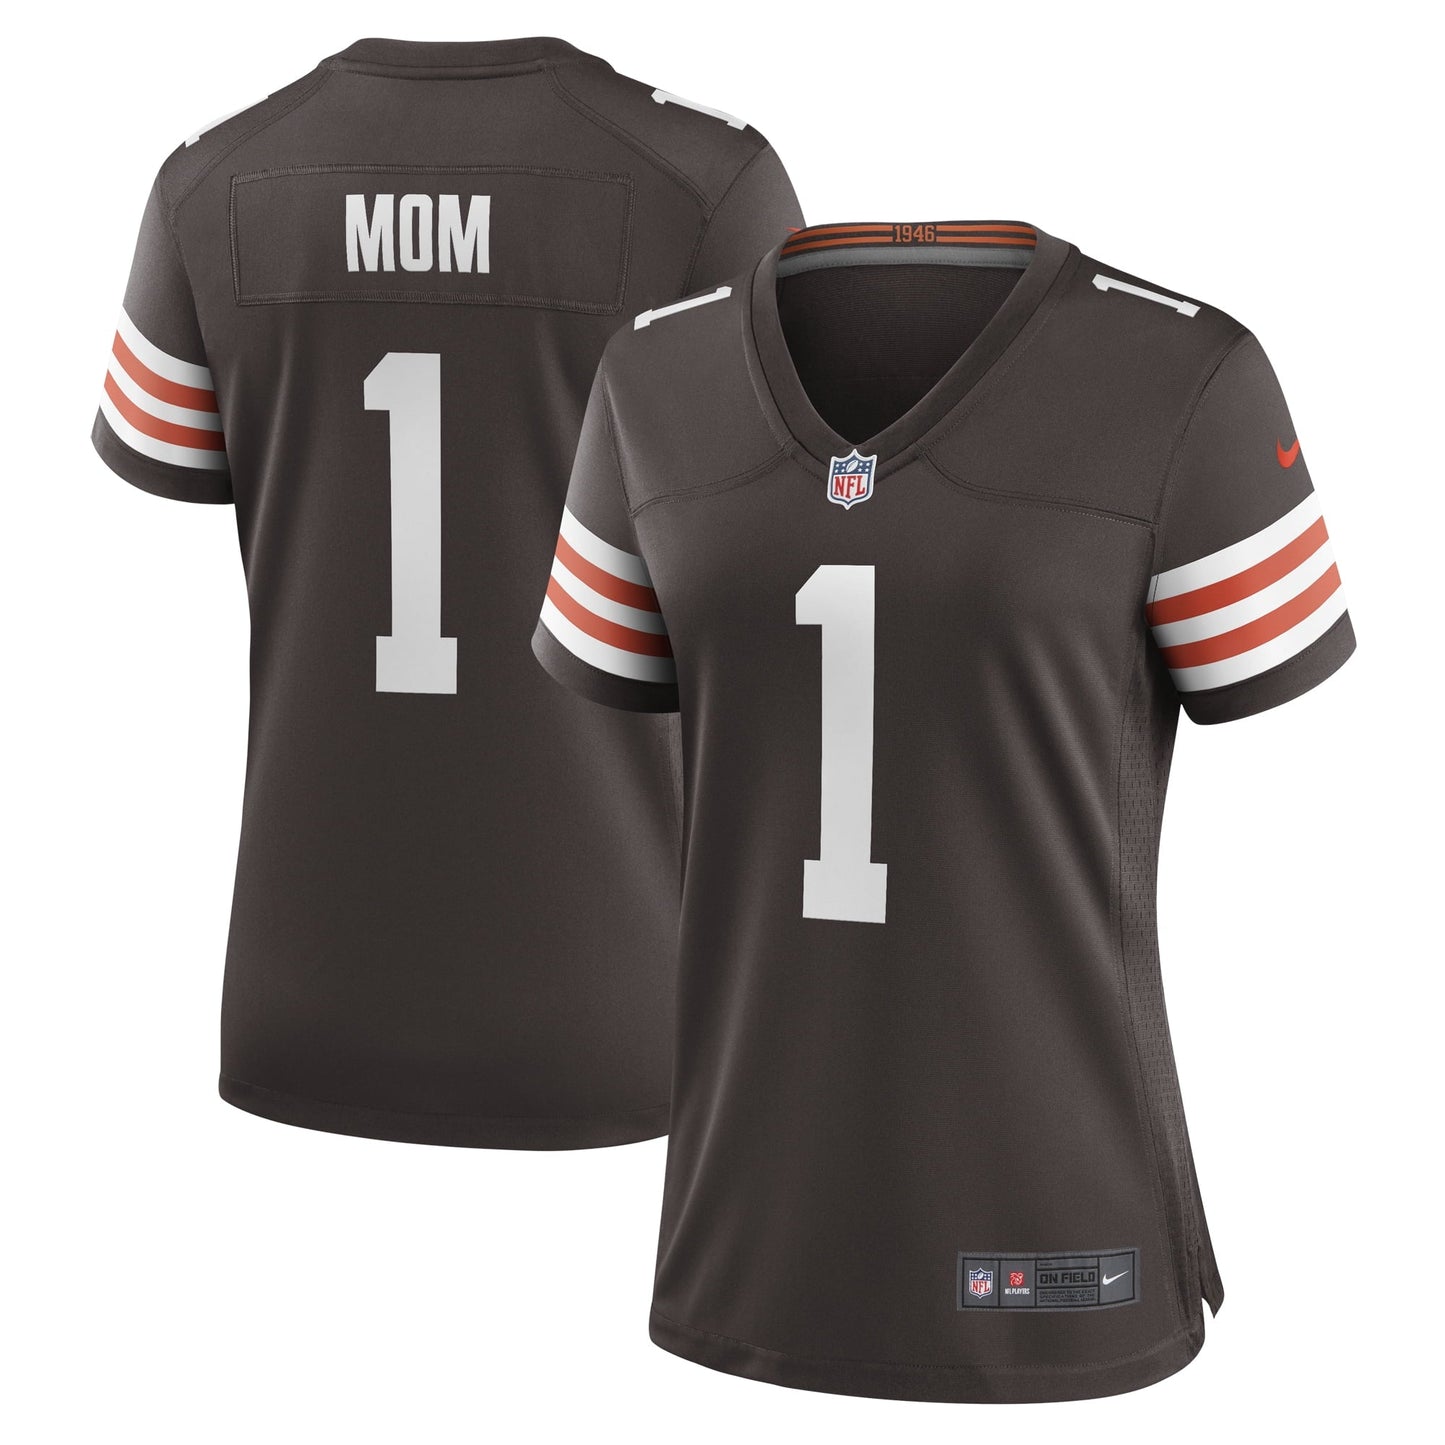 Women's Nike Number 1 Mom Brown Cleveland Browns Game Jersey